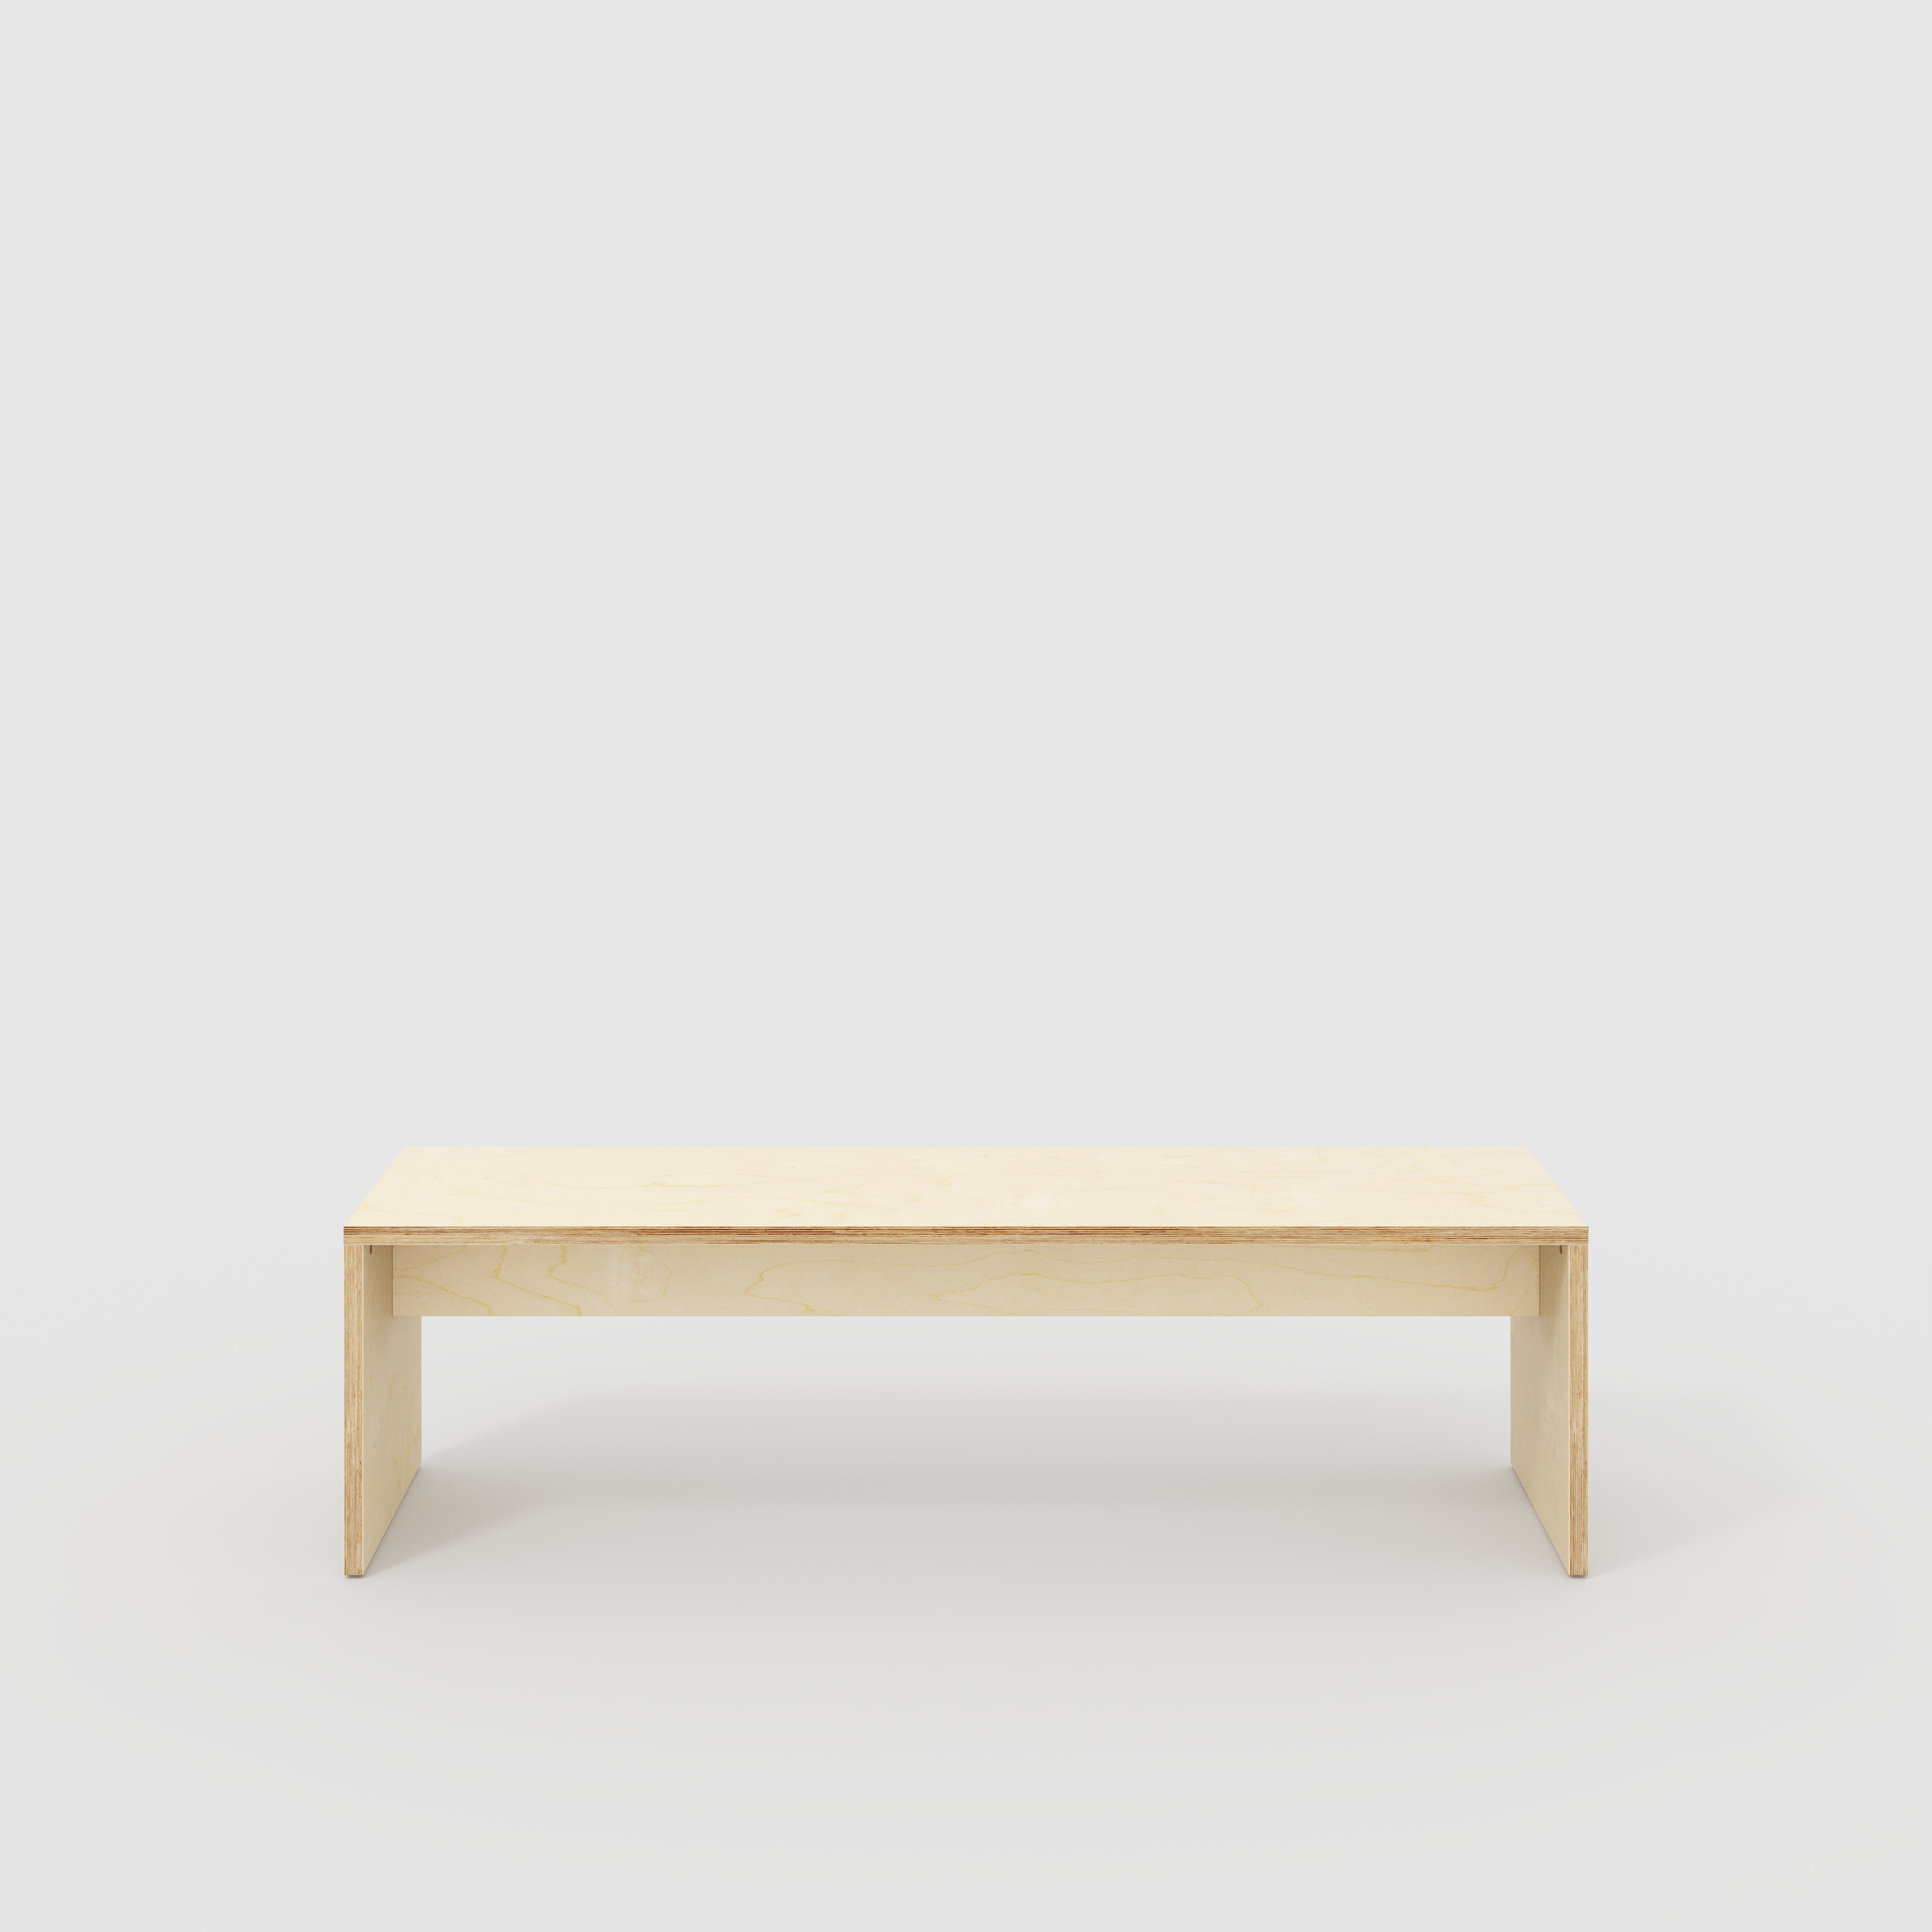 Bench Seat with Solid Sides - Plywood Birch - 1600(w) x 400(d)